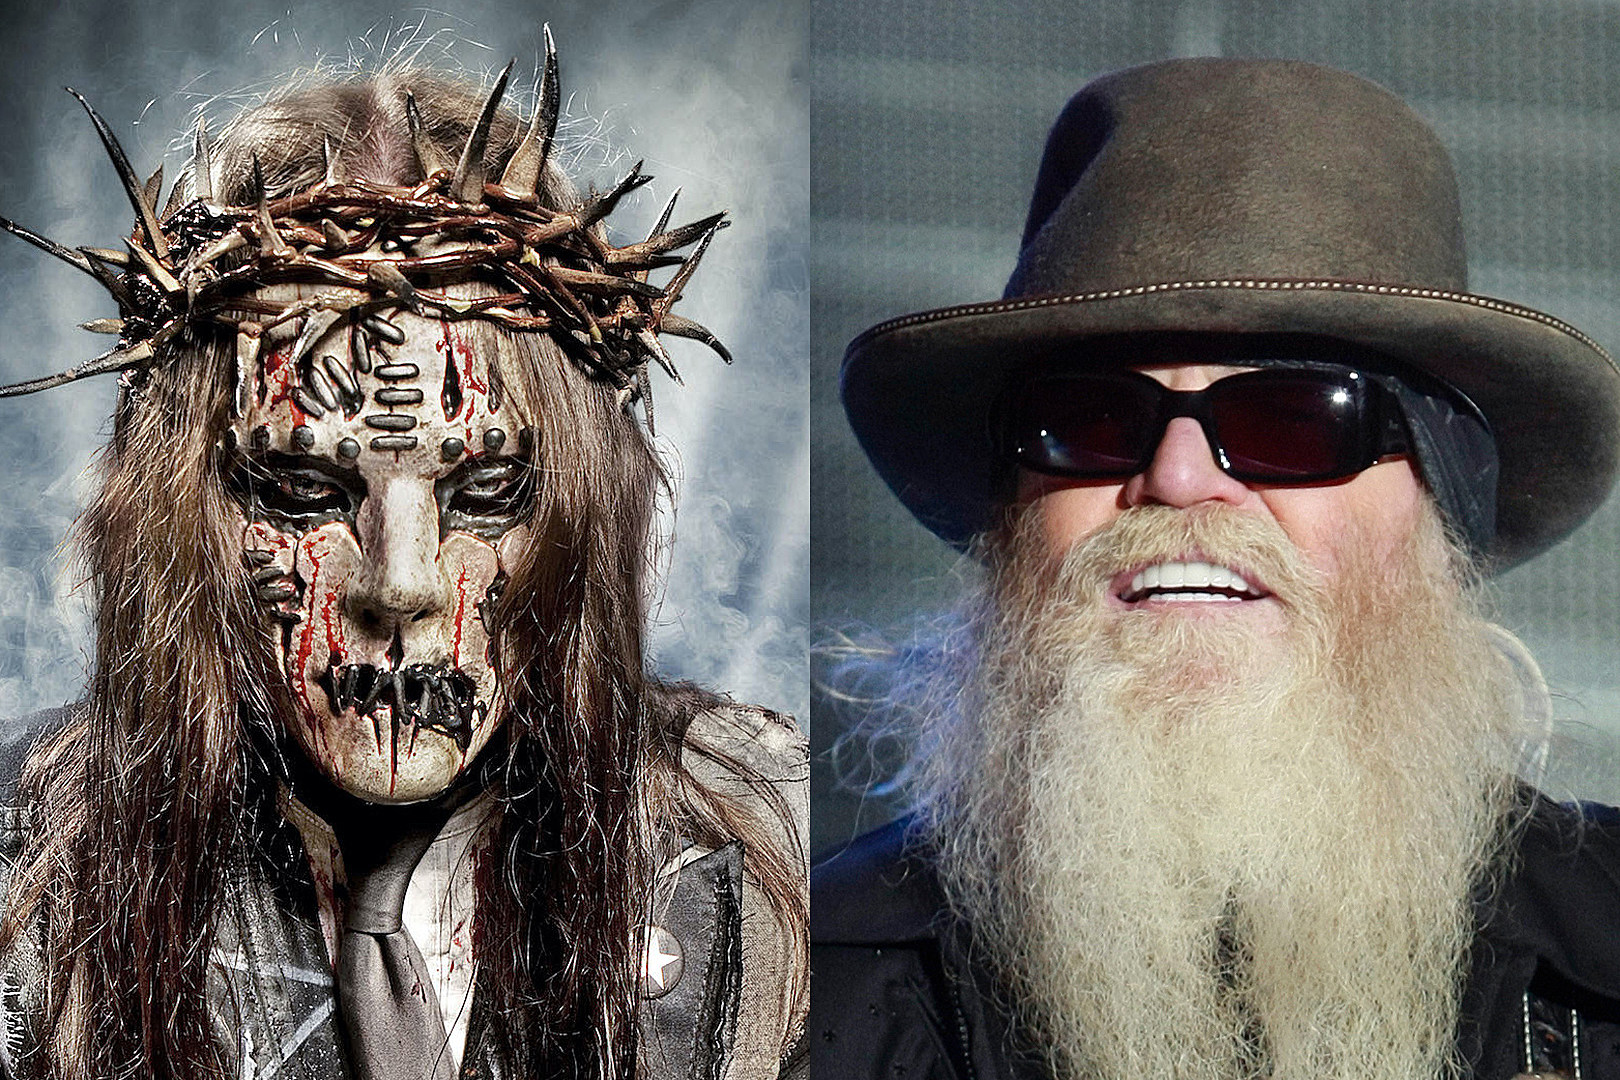 Slipknot + ZZ Top Dominate Charts After Deaths of Jordison + Hill